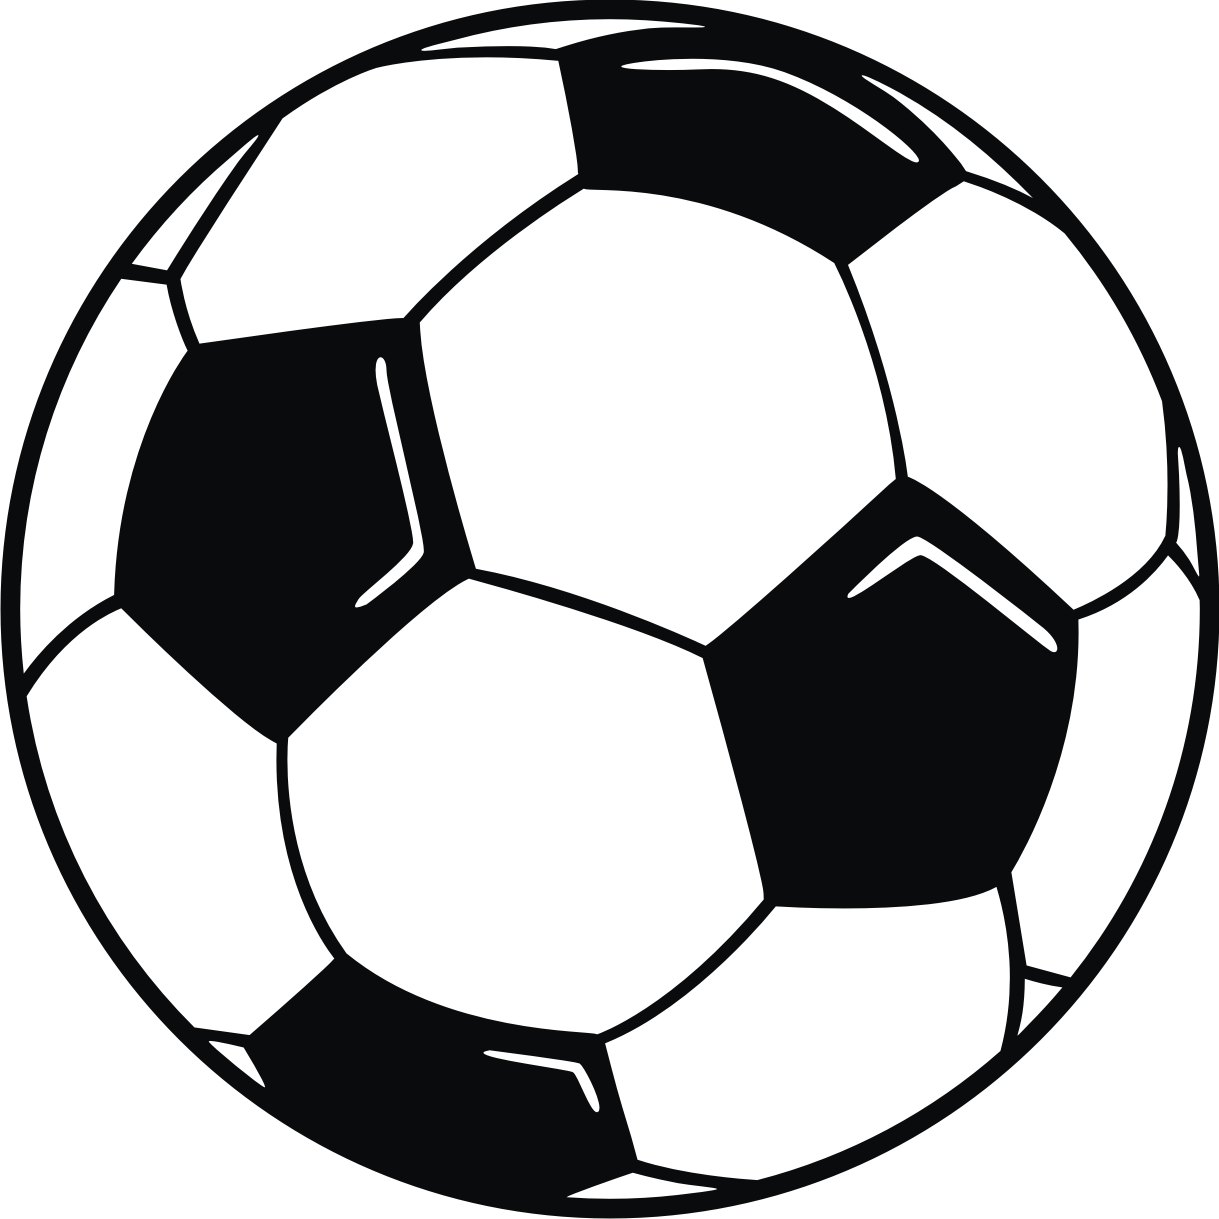 Soccer Ball Outline Drawing - ClipArt Best